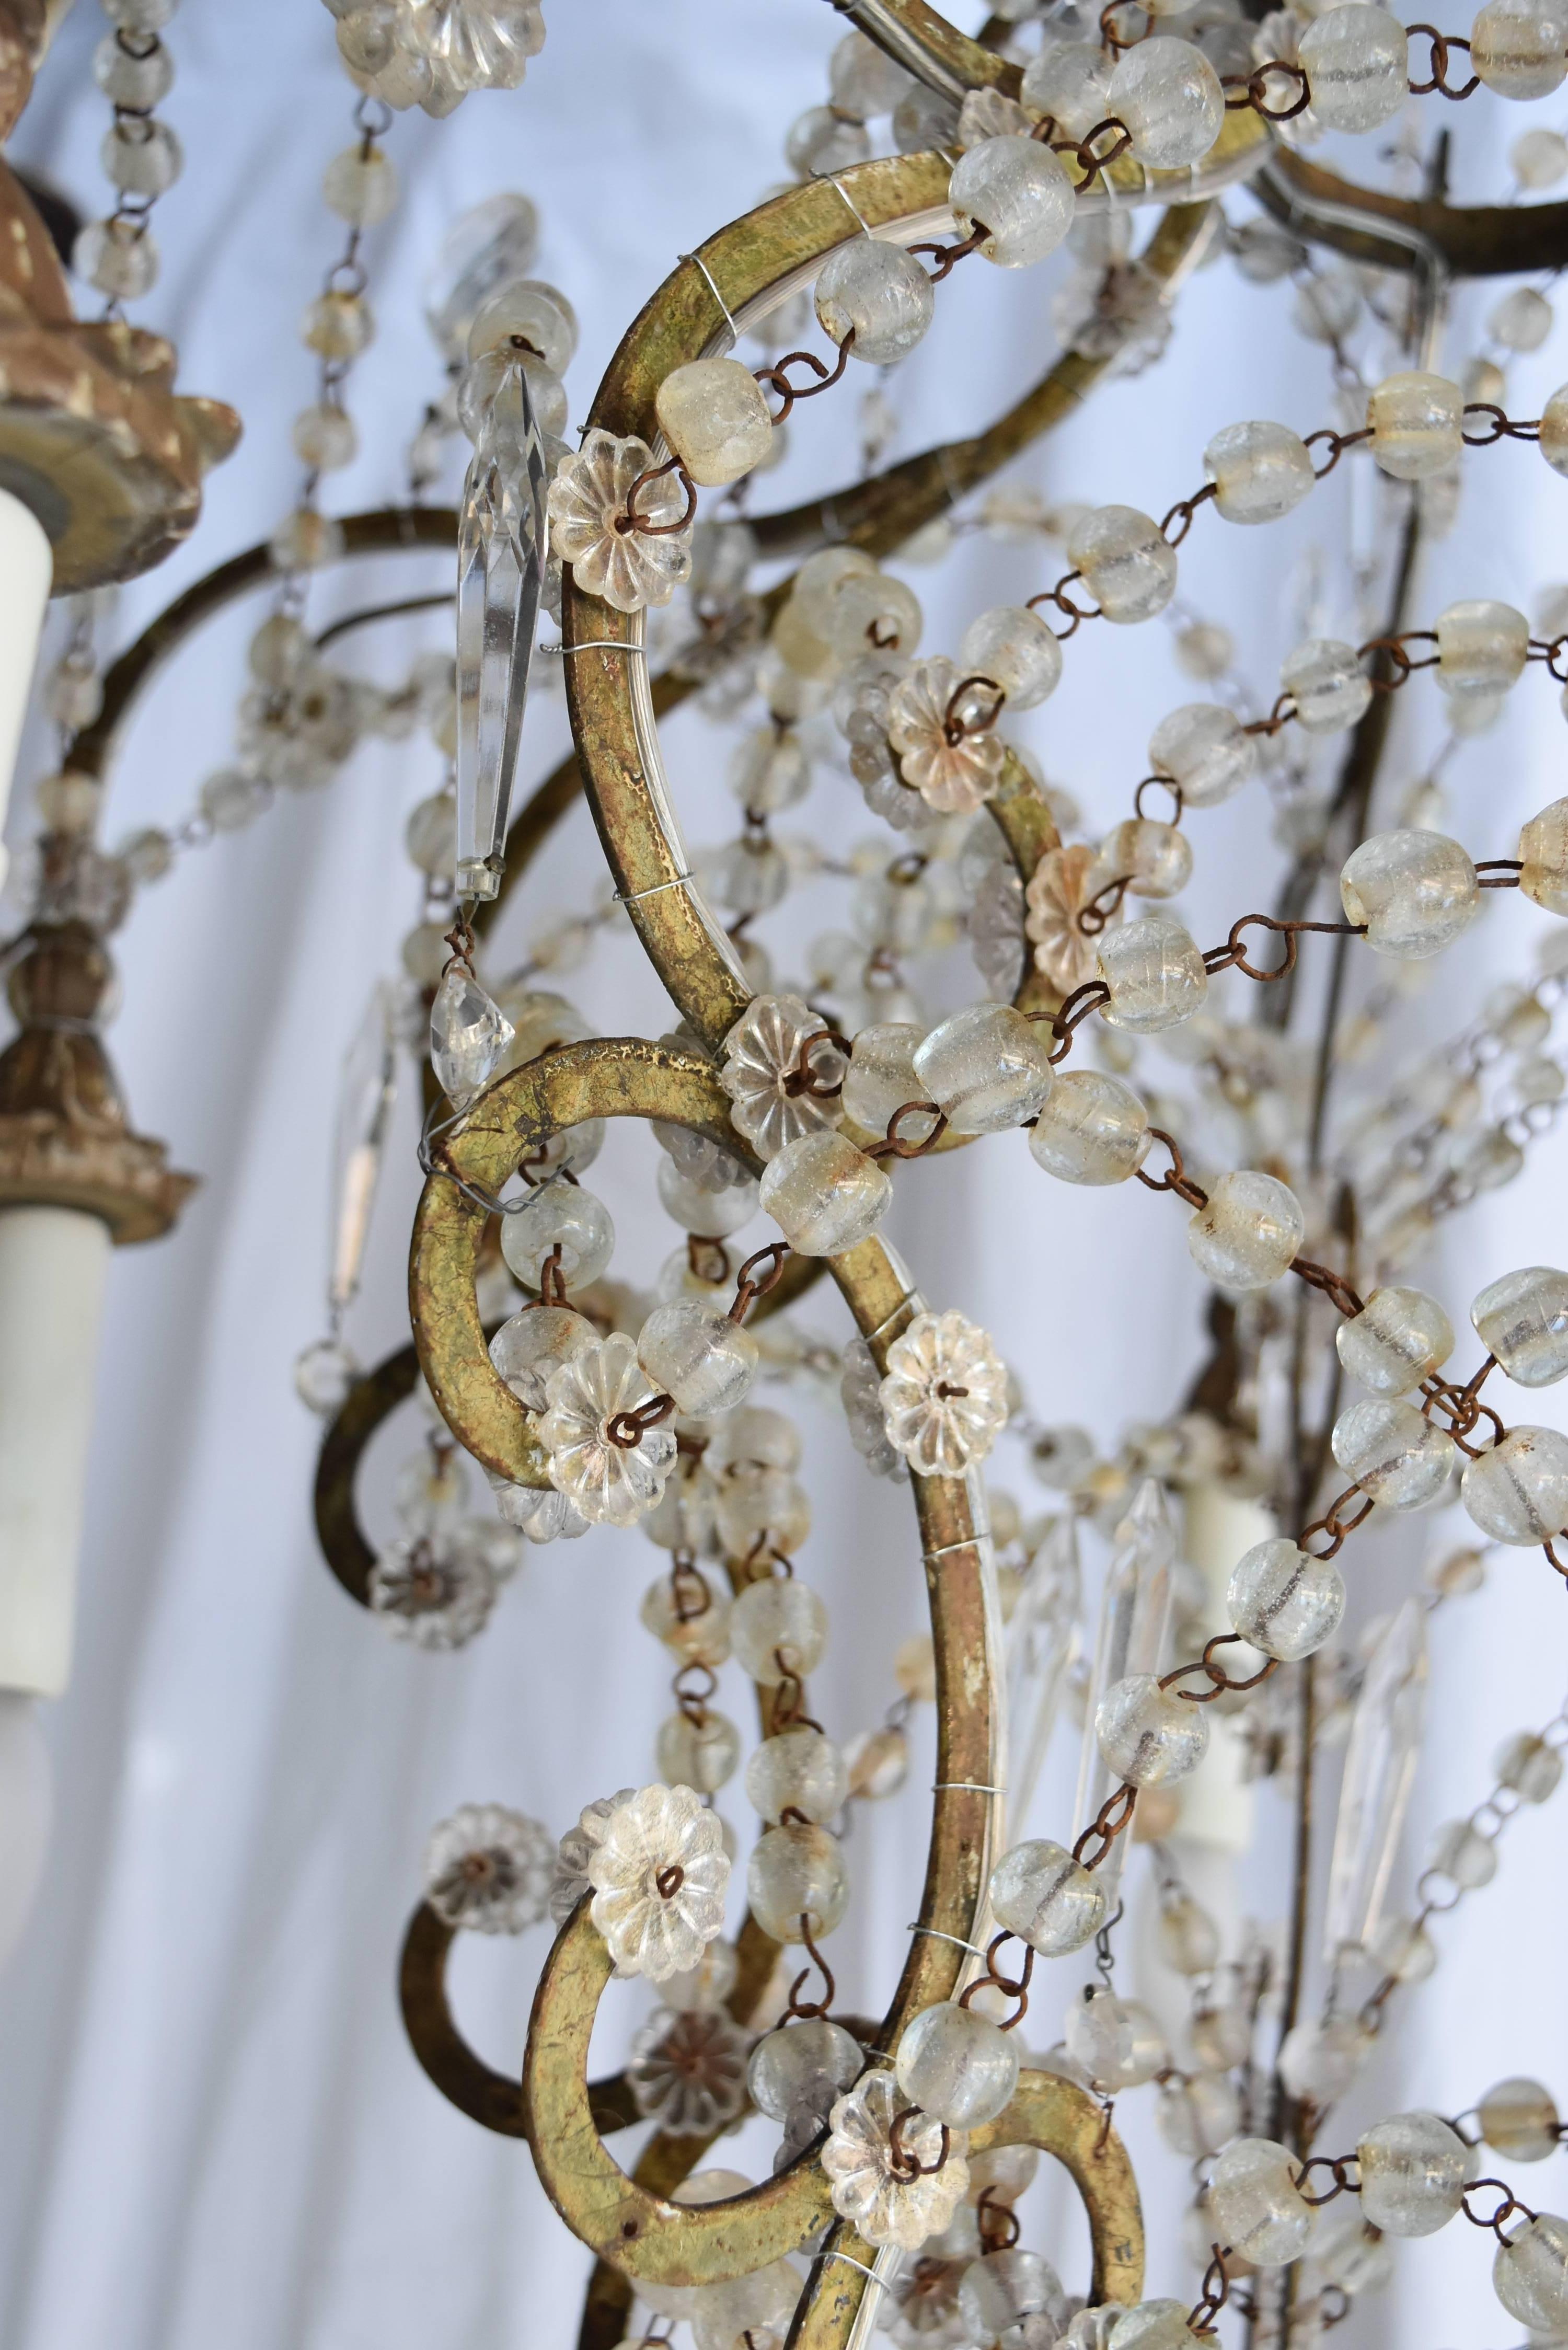 This beautiful Italian chandelier is early 19th century and features draped blown crystals with wooden gilt bobeches.